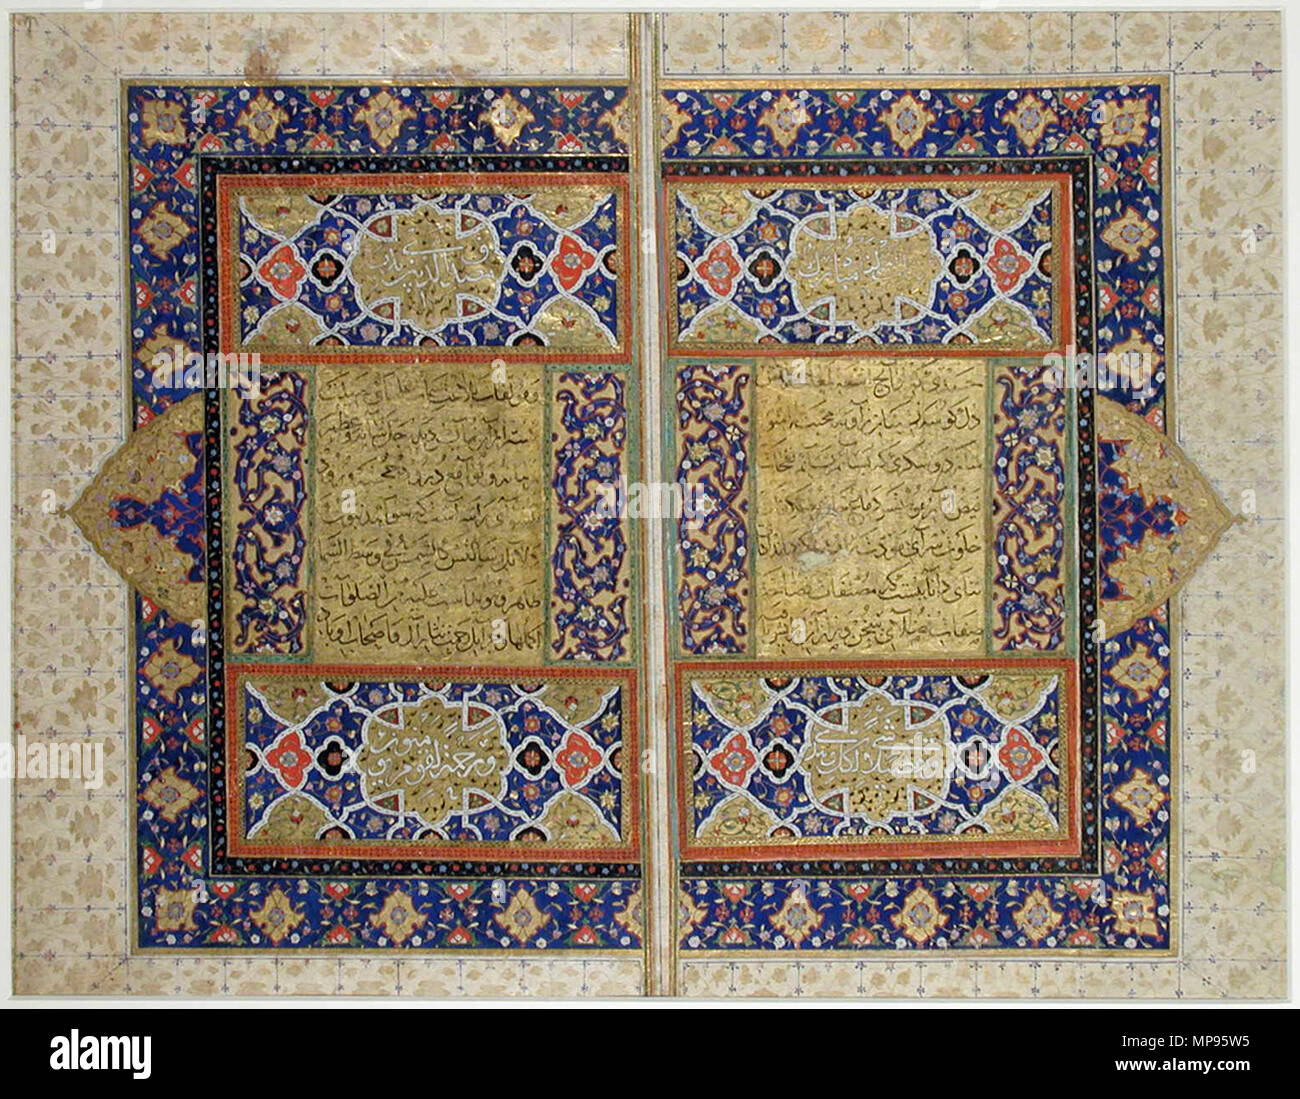 . English: Series Title: Shahnama Creation Date: 16th century Display Dimensions: 12 3/8 in. x 10 31/32 in. (31.4 cm x 27.86 cm) Credit Line: Gift of Edwin Binney 3rd Accession Number: 1971.64 Collection: <a href='http://www.sdmart.org/art/our-collection/asian-art' rel='nofollow'>The San Diego Museum of Art</a> . 1 October 2001, 14:58:57. English: thesandiegomuseumofartcollection 773 Koran Frontispiece (two sections) (6124498873) Stock Photo